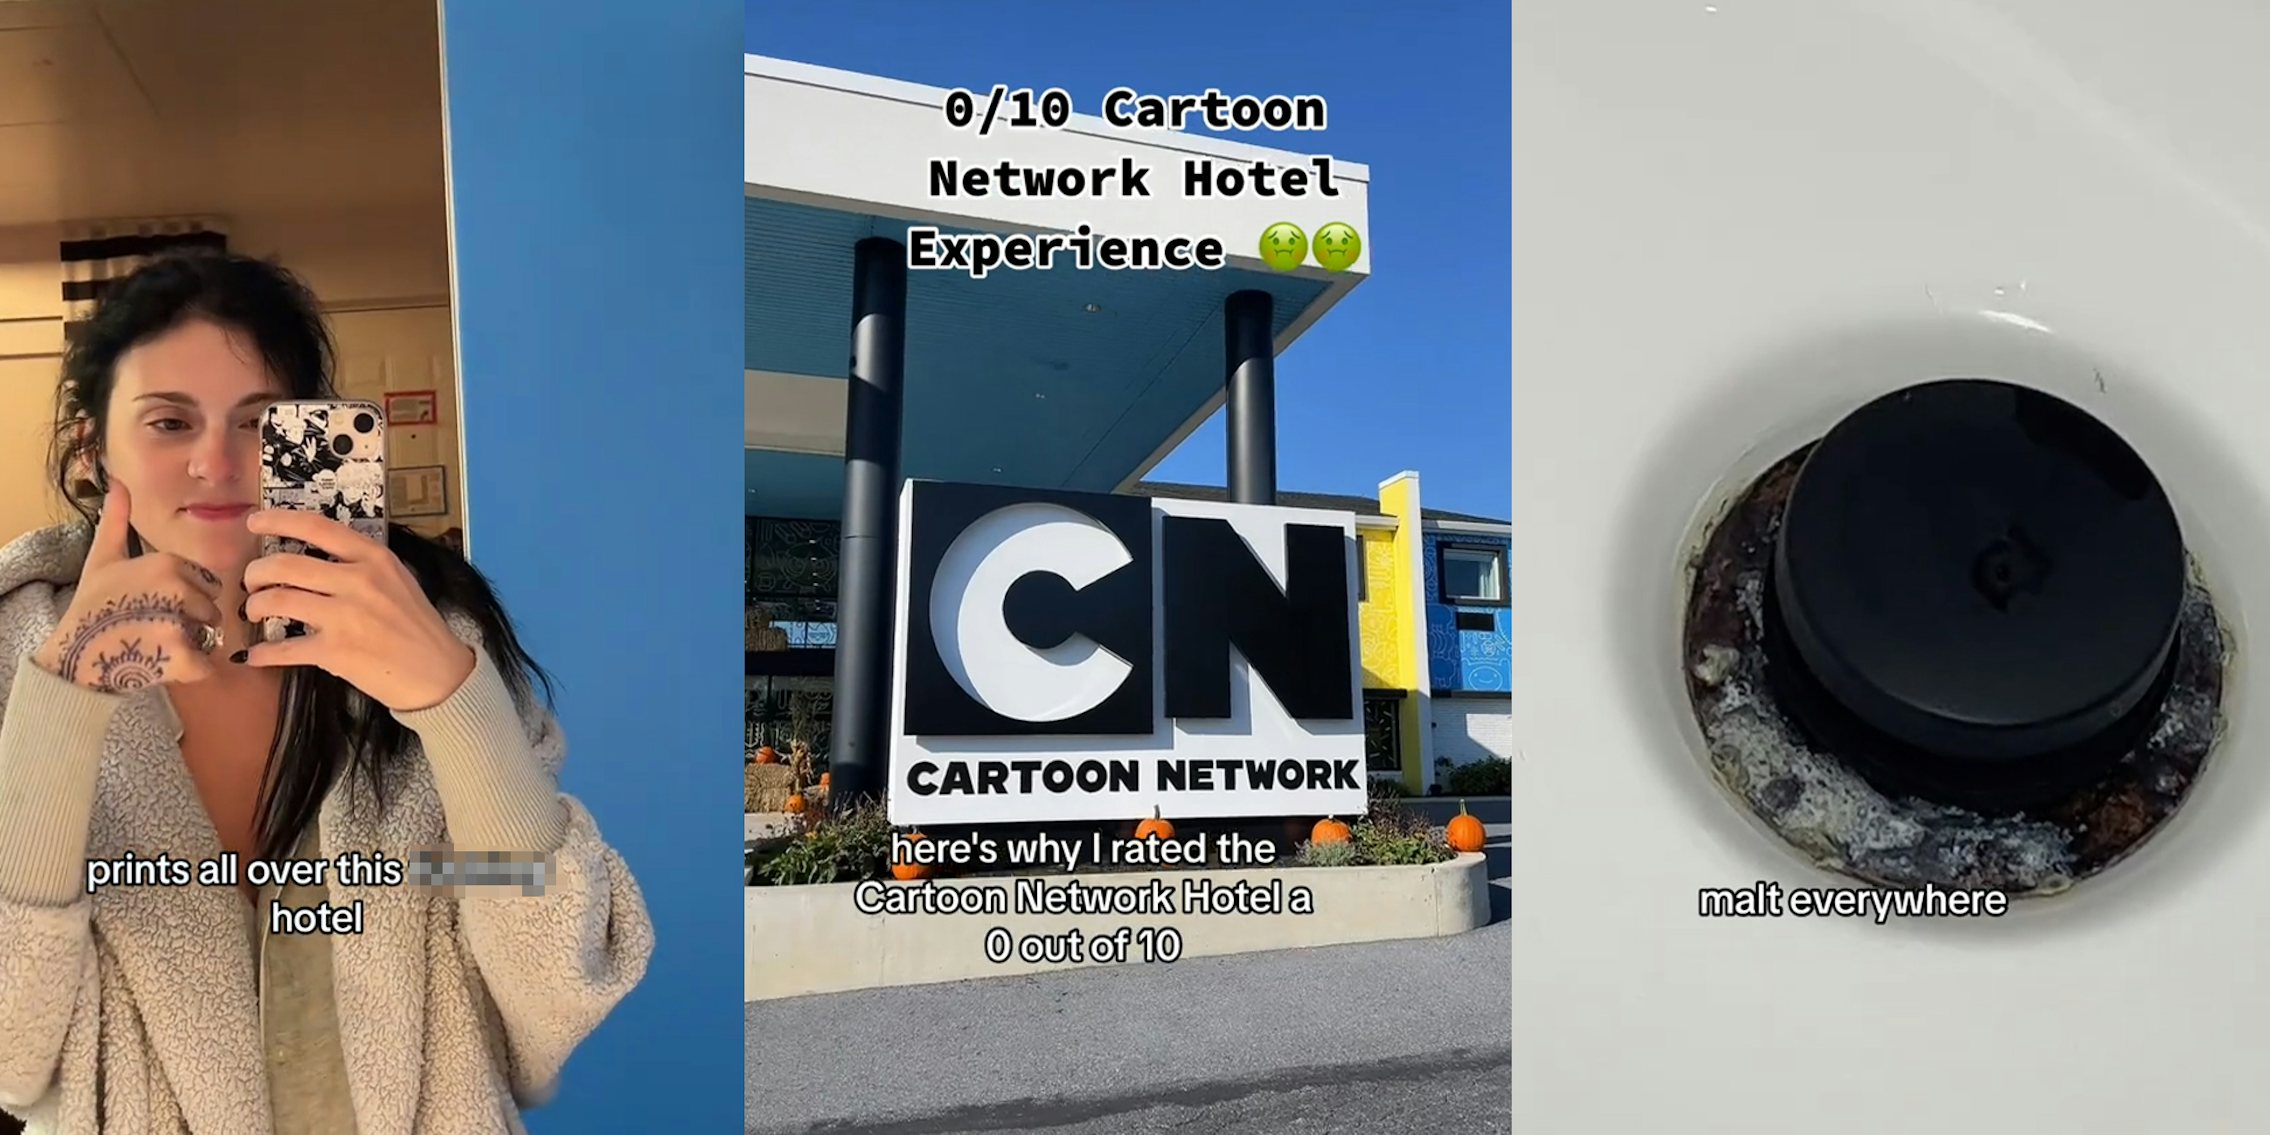 Guest rates Cartoon Network Hotel a 0/10